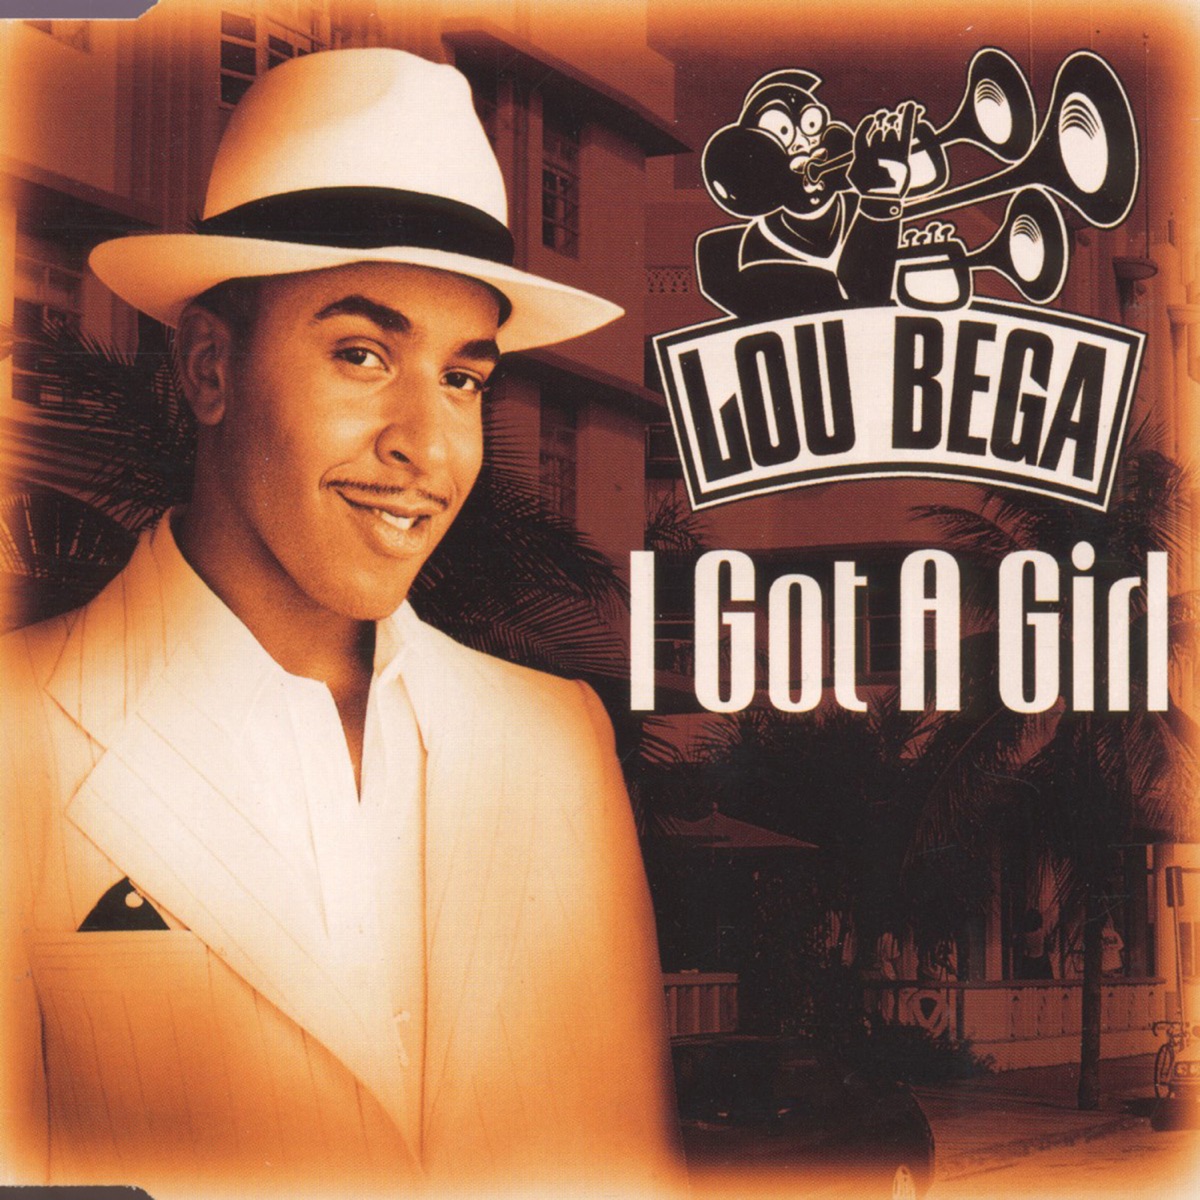 Mambo No. 5 (A Little Bit Of...) - EP - Album by Lou Bega - Apple Music